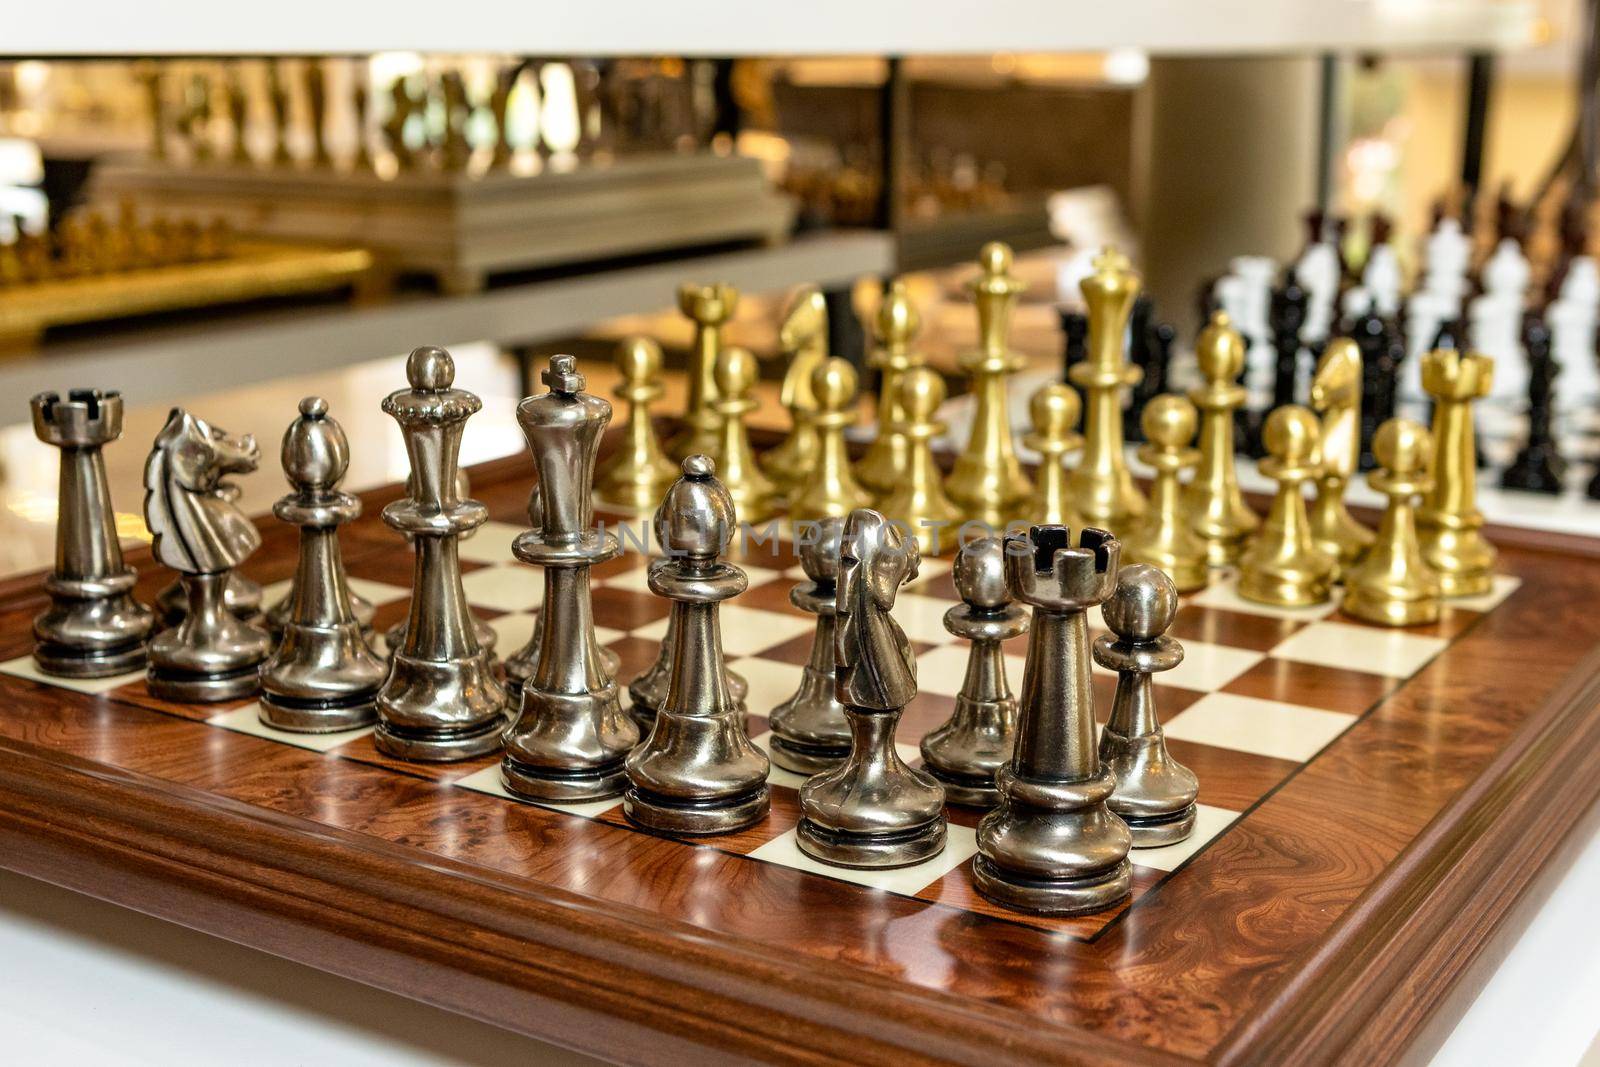 Luxury chess board decoration for home by ferhad